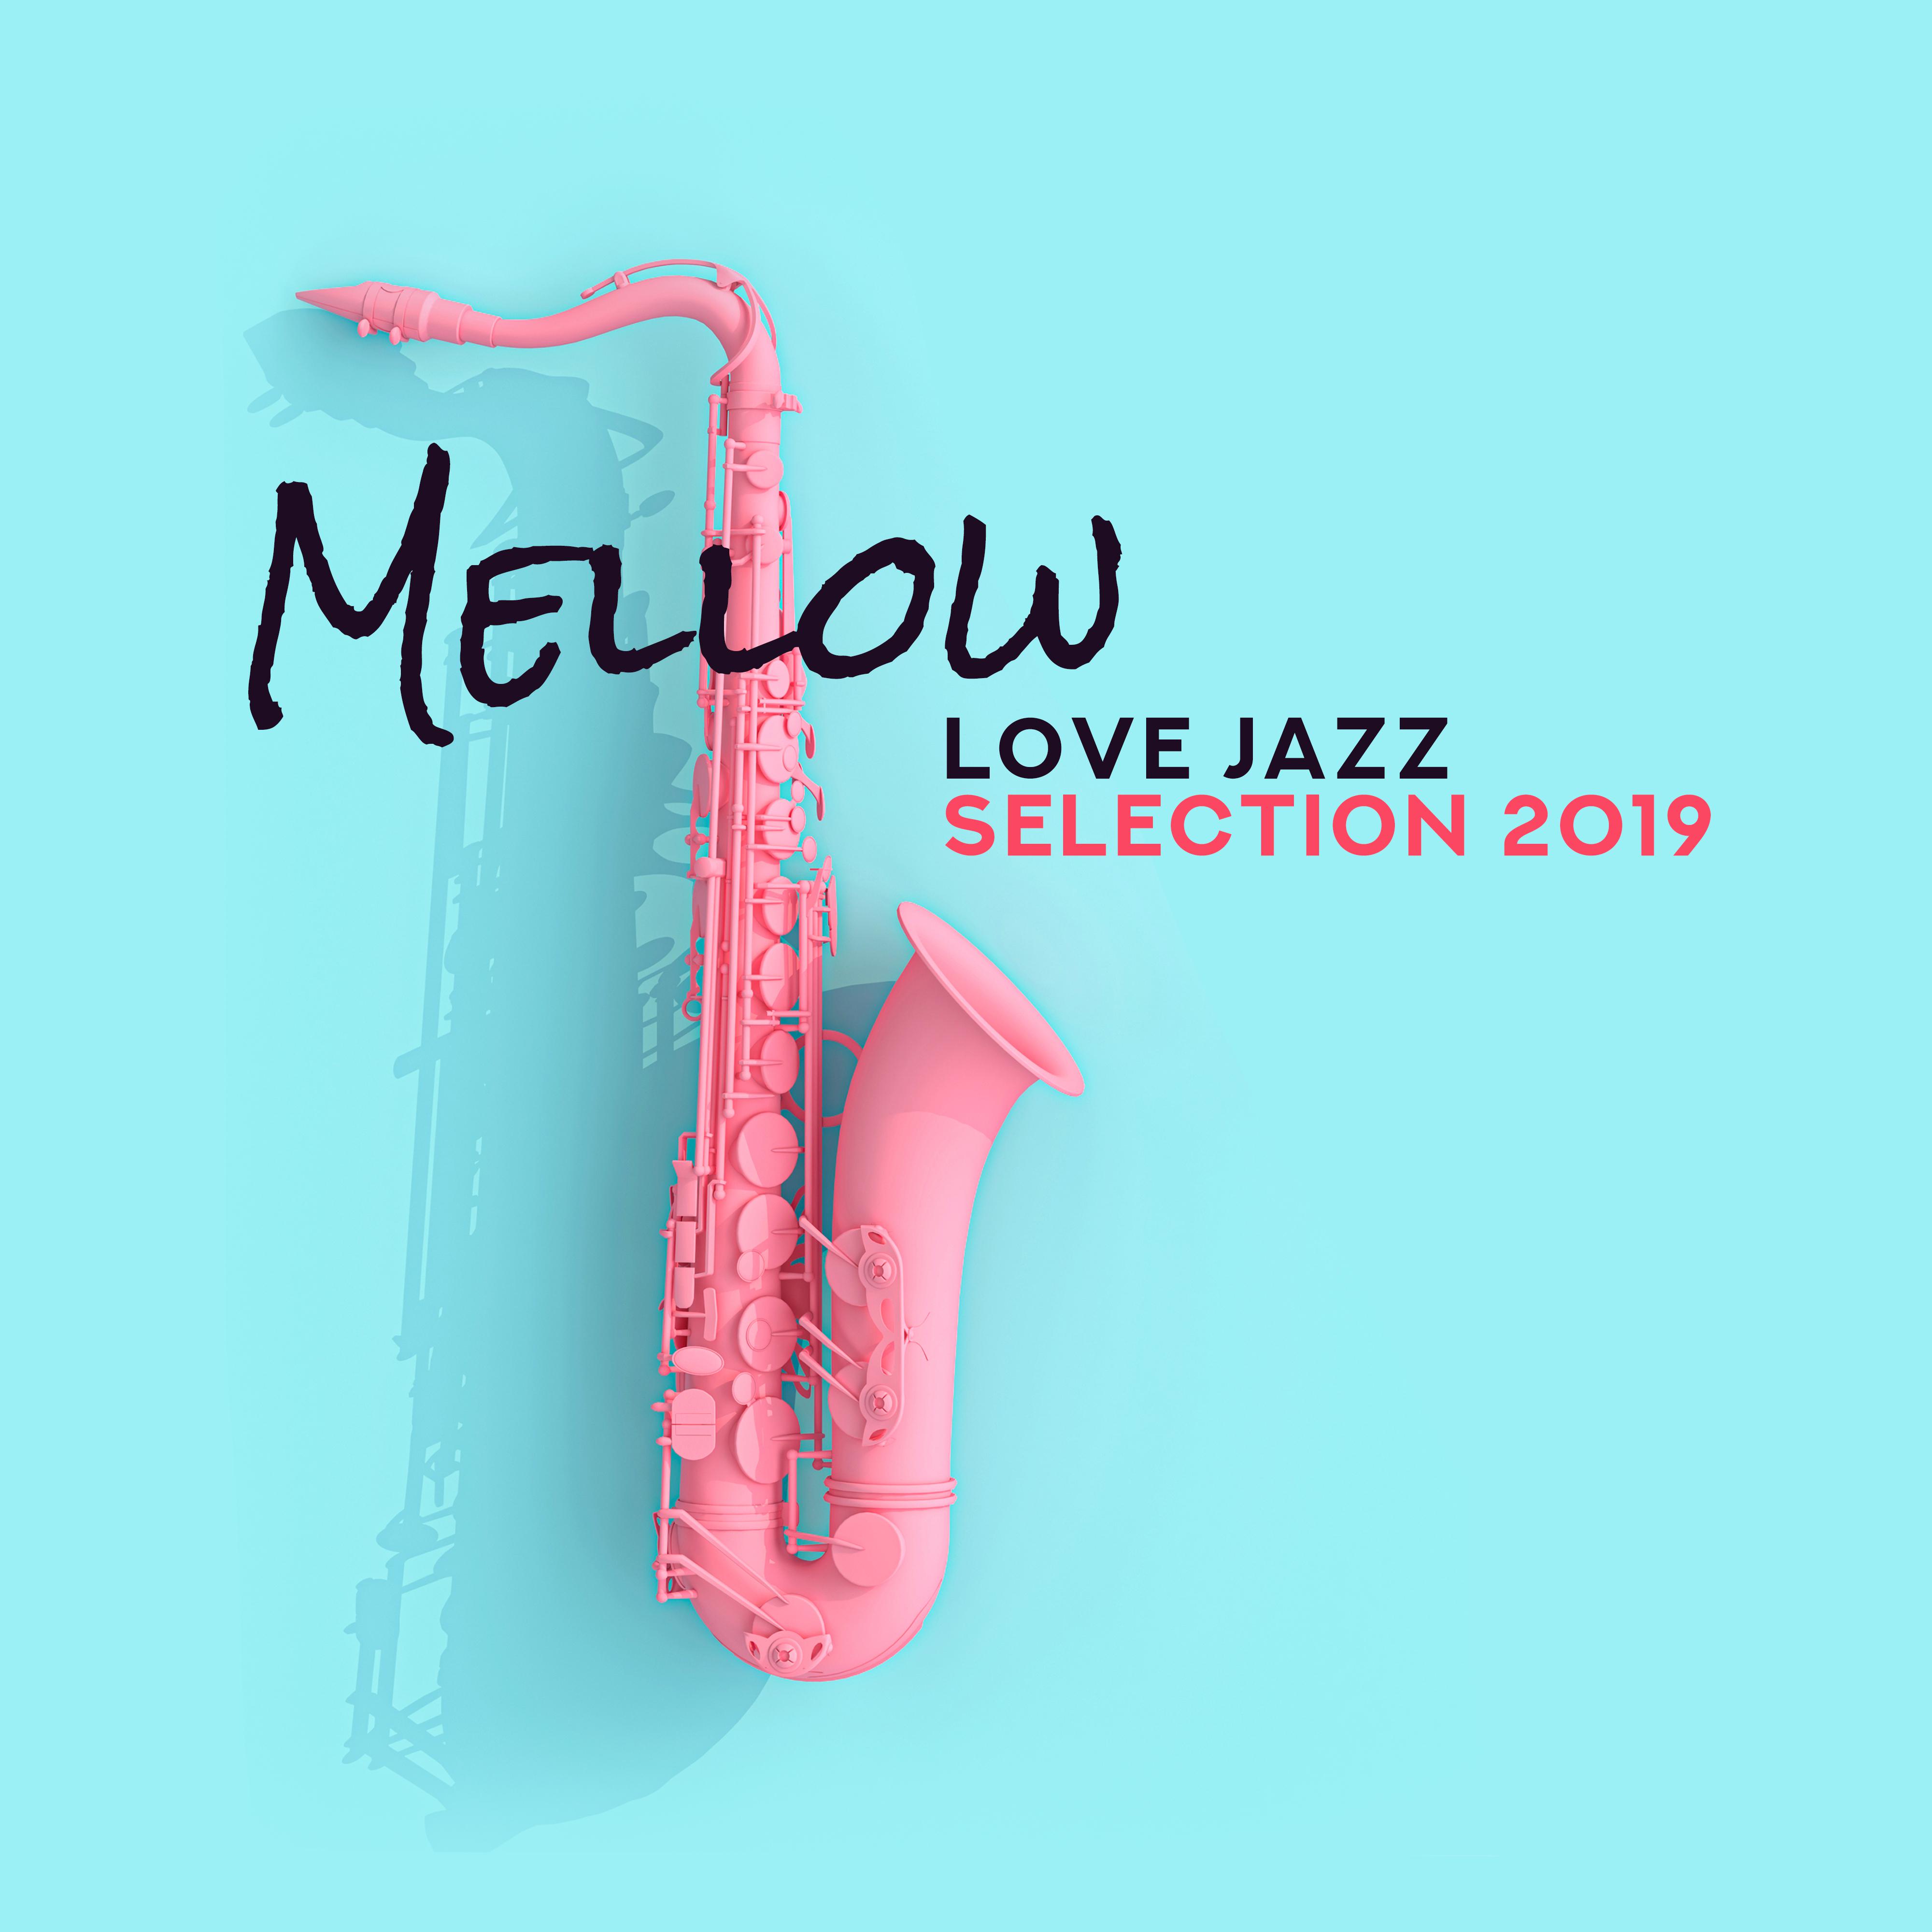 Mellow Love Jazz Selection 2019: Romantic Compilation of Smooth Jazz Music Created for Couple’s Evening Date in Elegant Restaurant & Intimate Moments at Home, Swing Vintage Piano Melodies